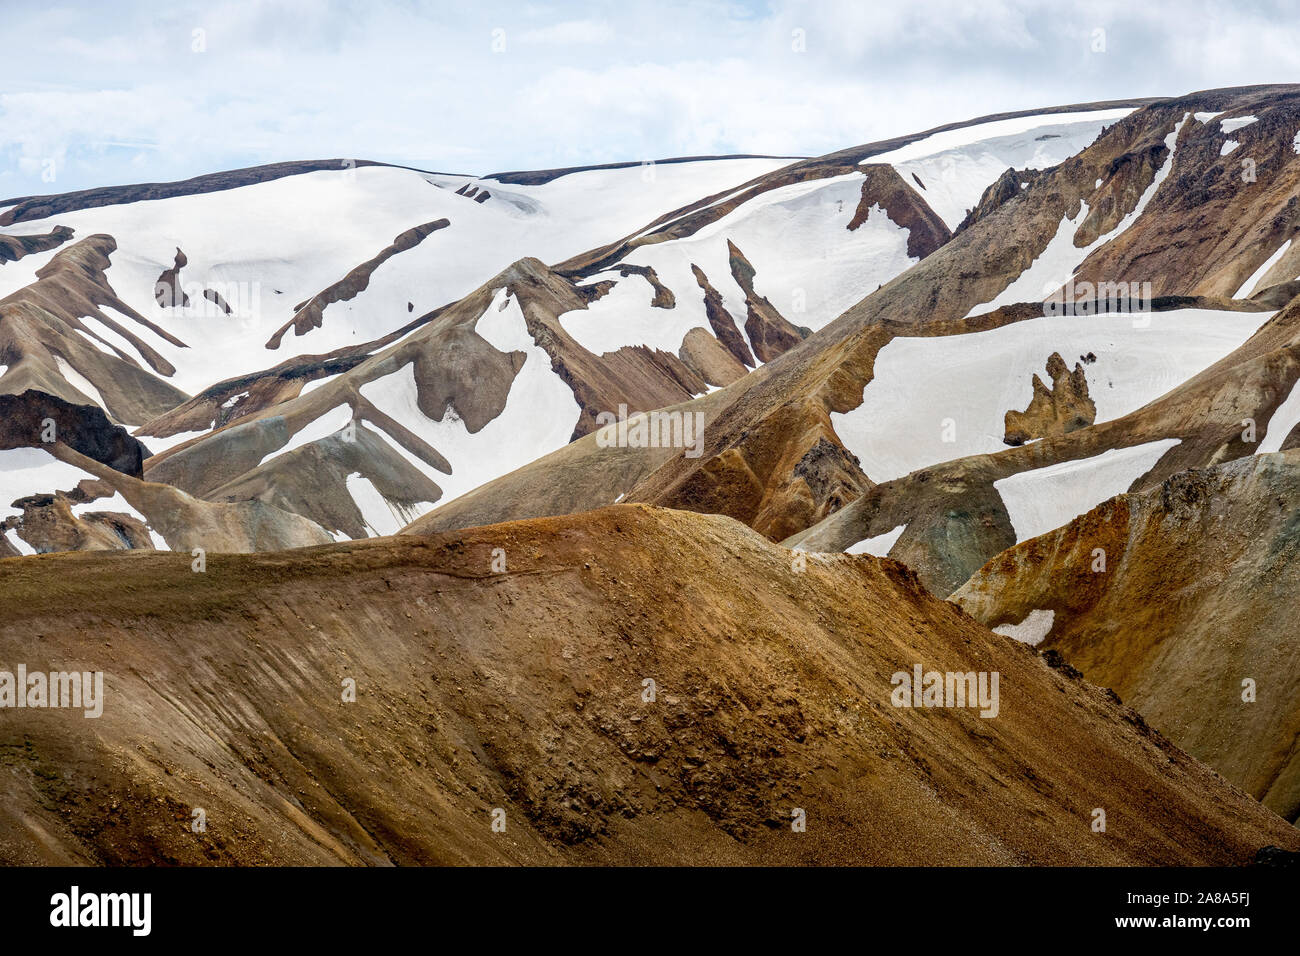 Snow-capped undulating barren hills of lava are set below a bright cloudy sky in Iceland Stock Photo